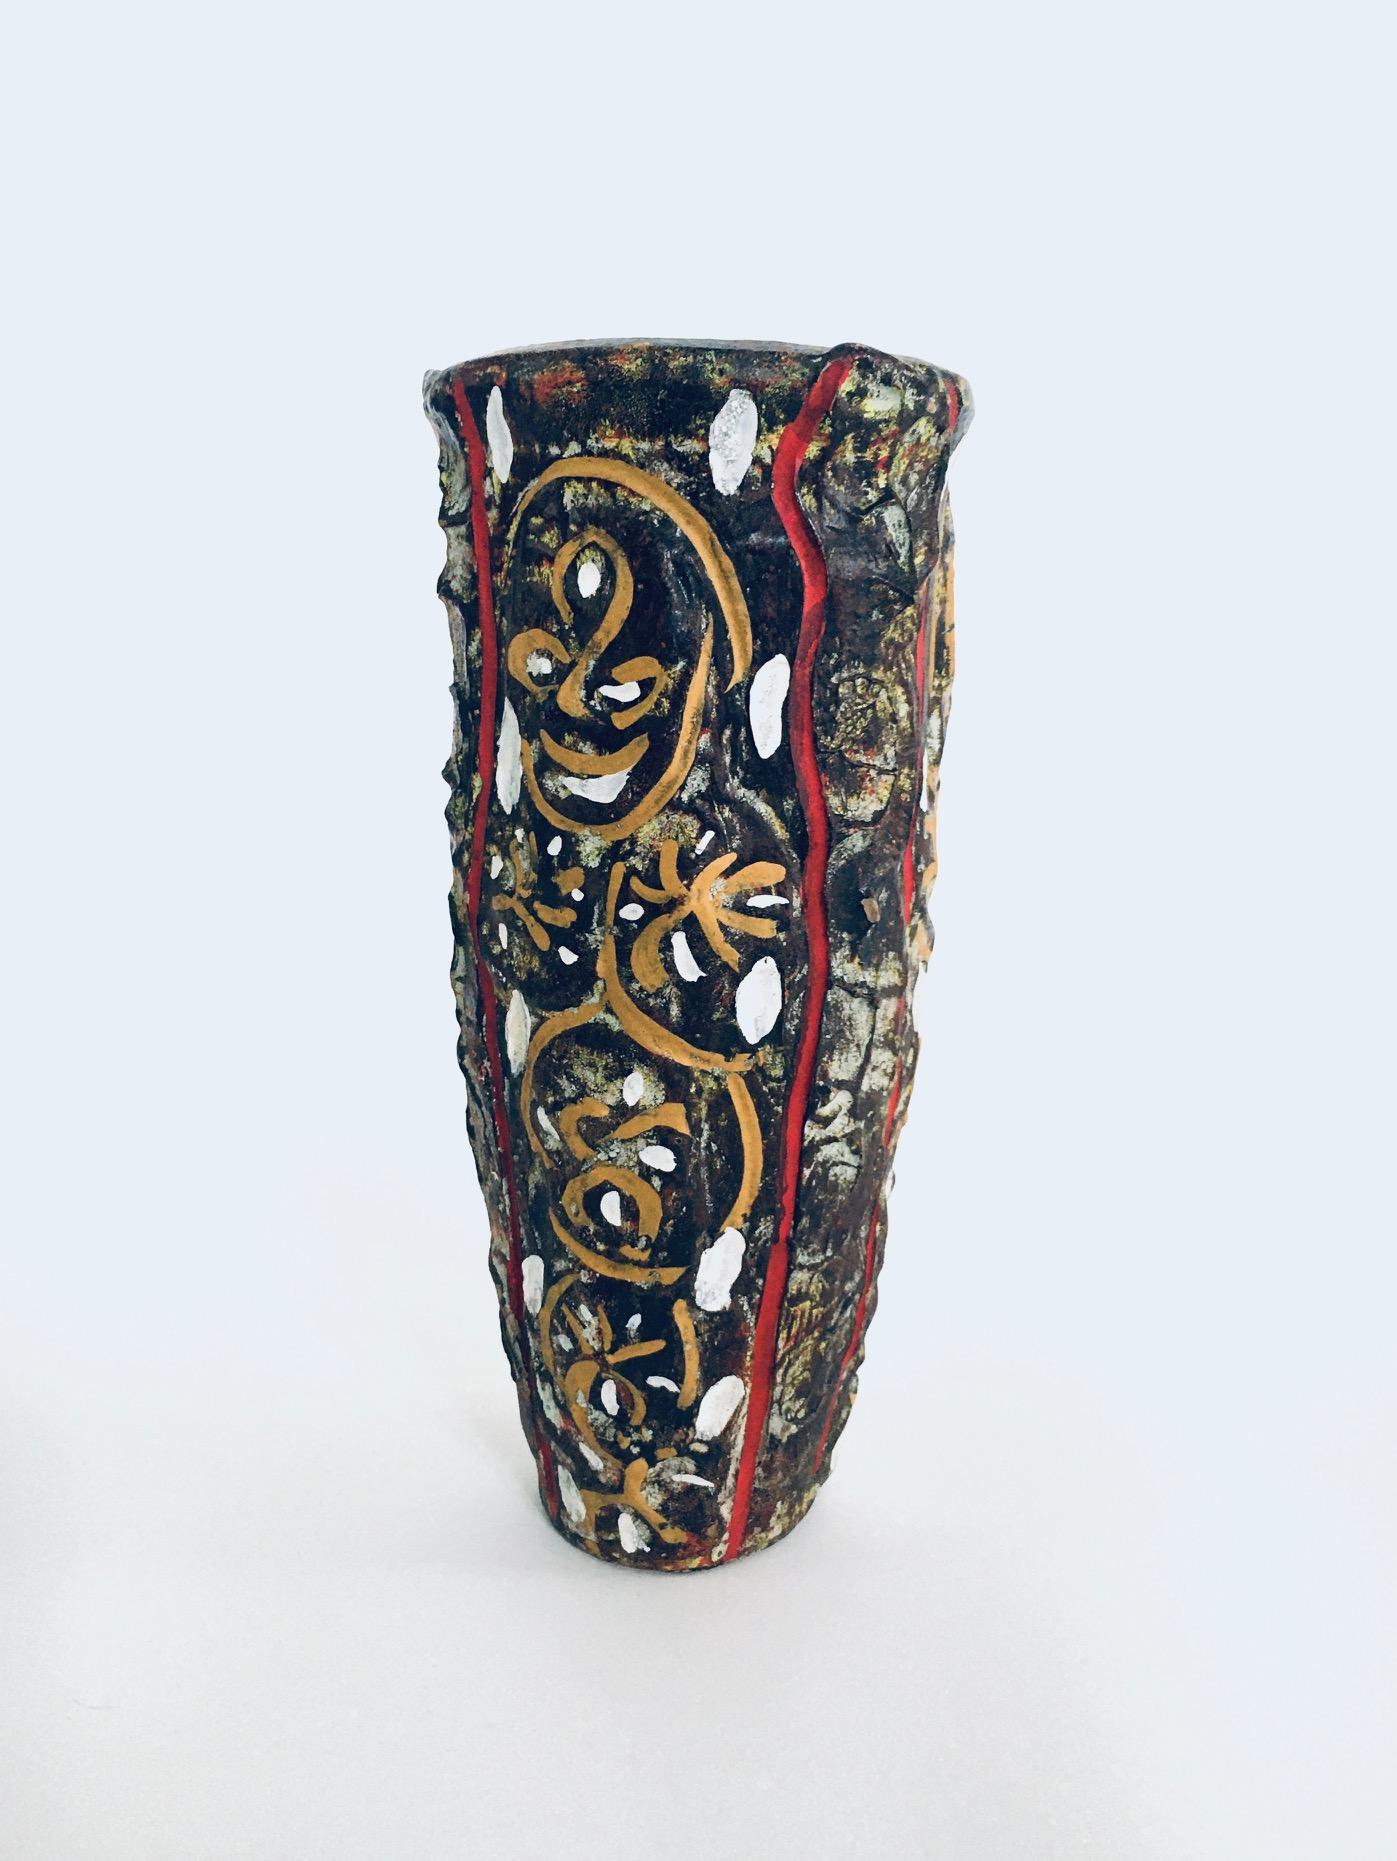 Vintage RARE Brutalist Design Art Pottery Studio Painted Vase. Made in Belgium, 1960's period. No markings of the artist on this vase. Multicolored painted brutalist shaped vase that's reminiscent of African Art Culture. This vase comes in good